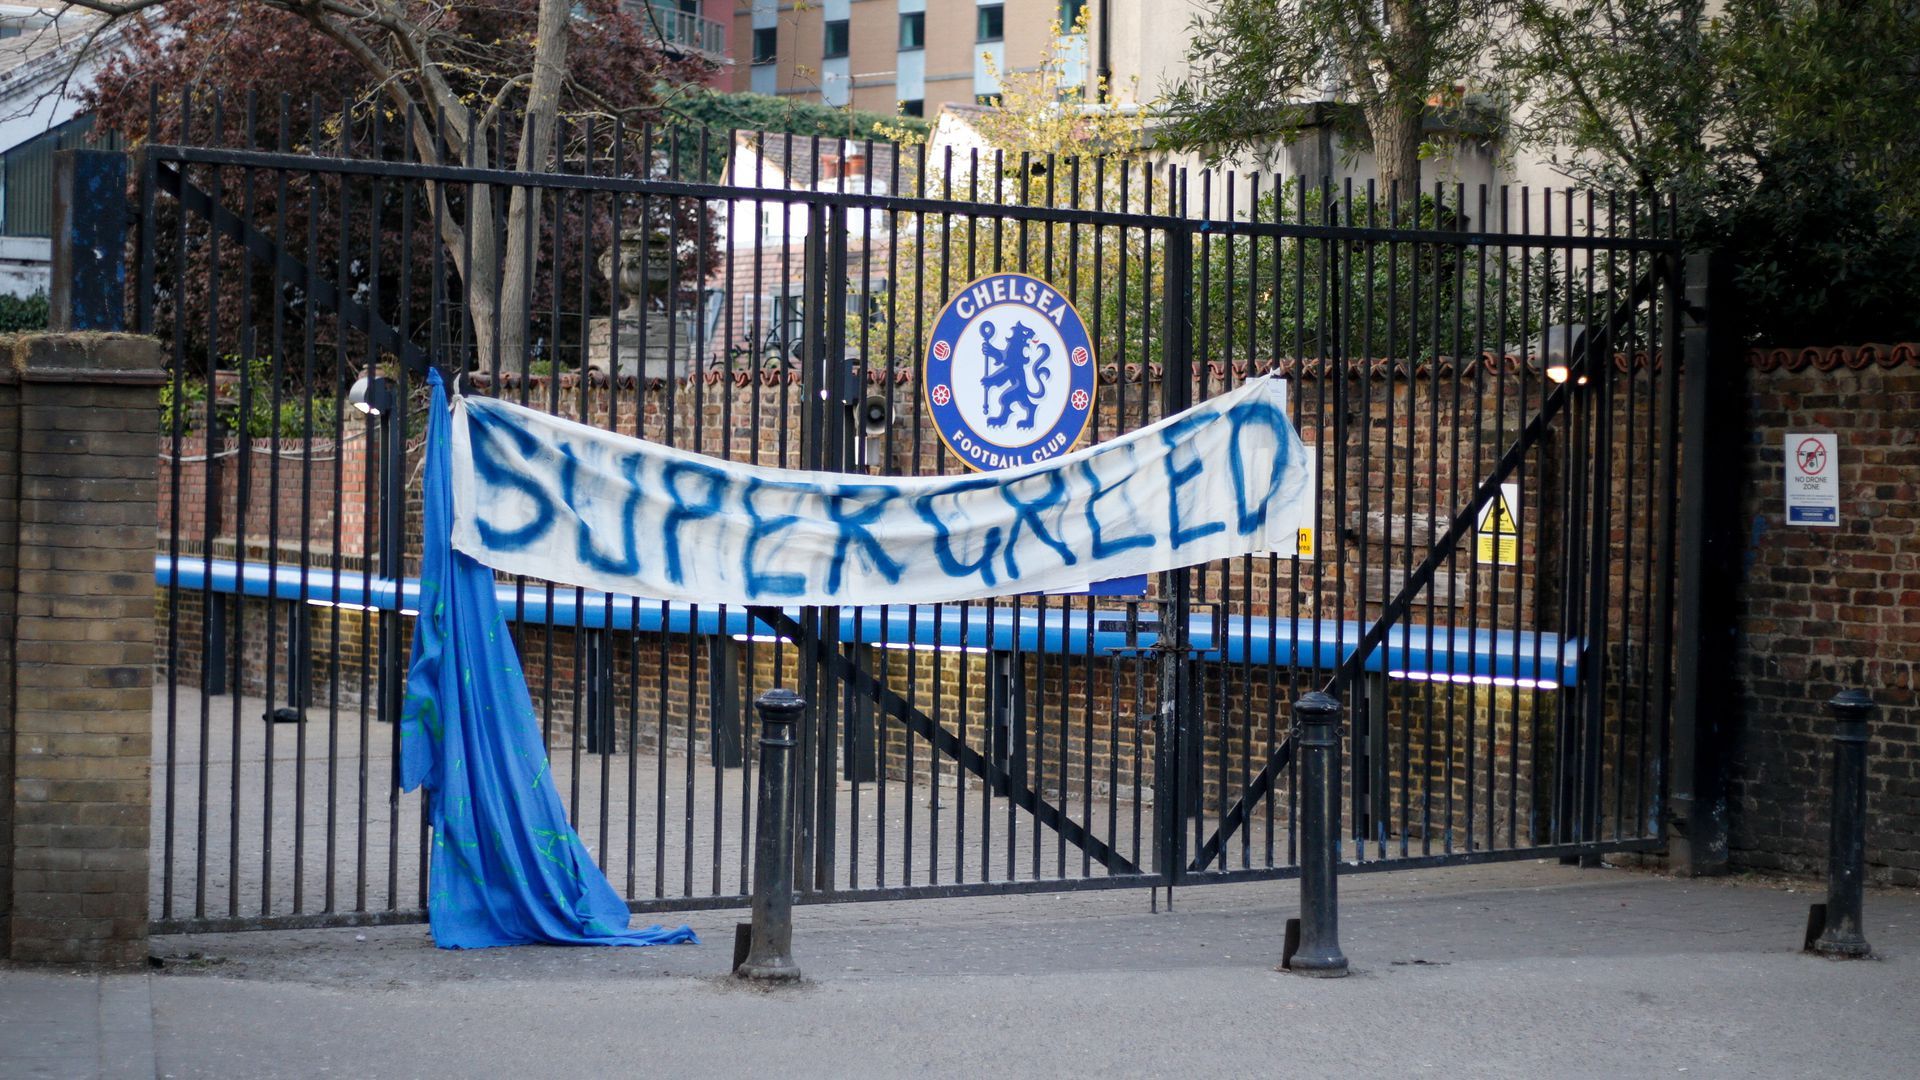 A sign reading "Super greed" hangs on a fence with the chelsea football club logo.